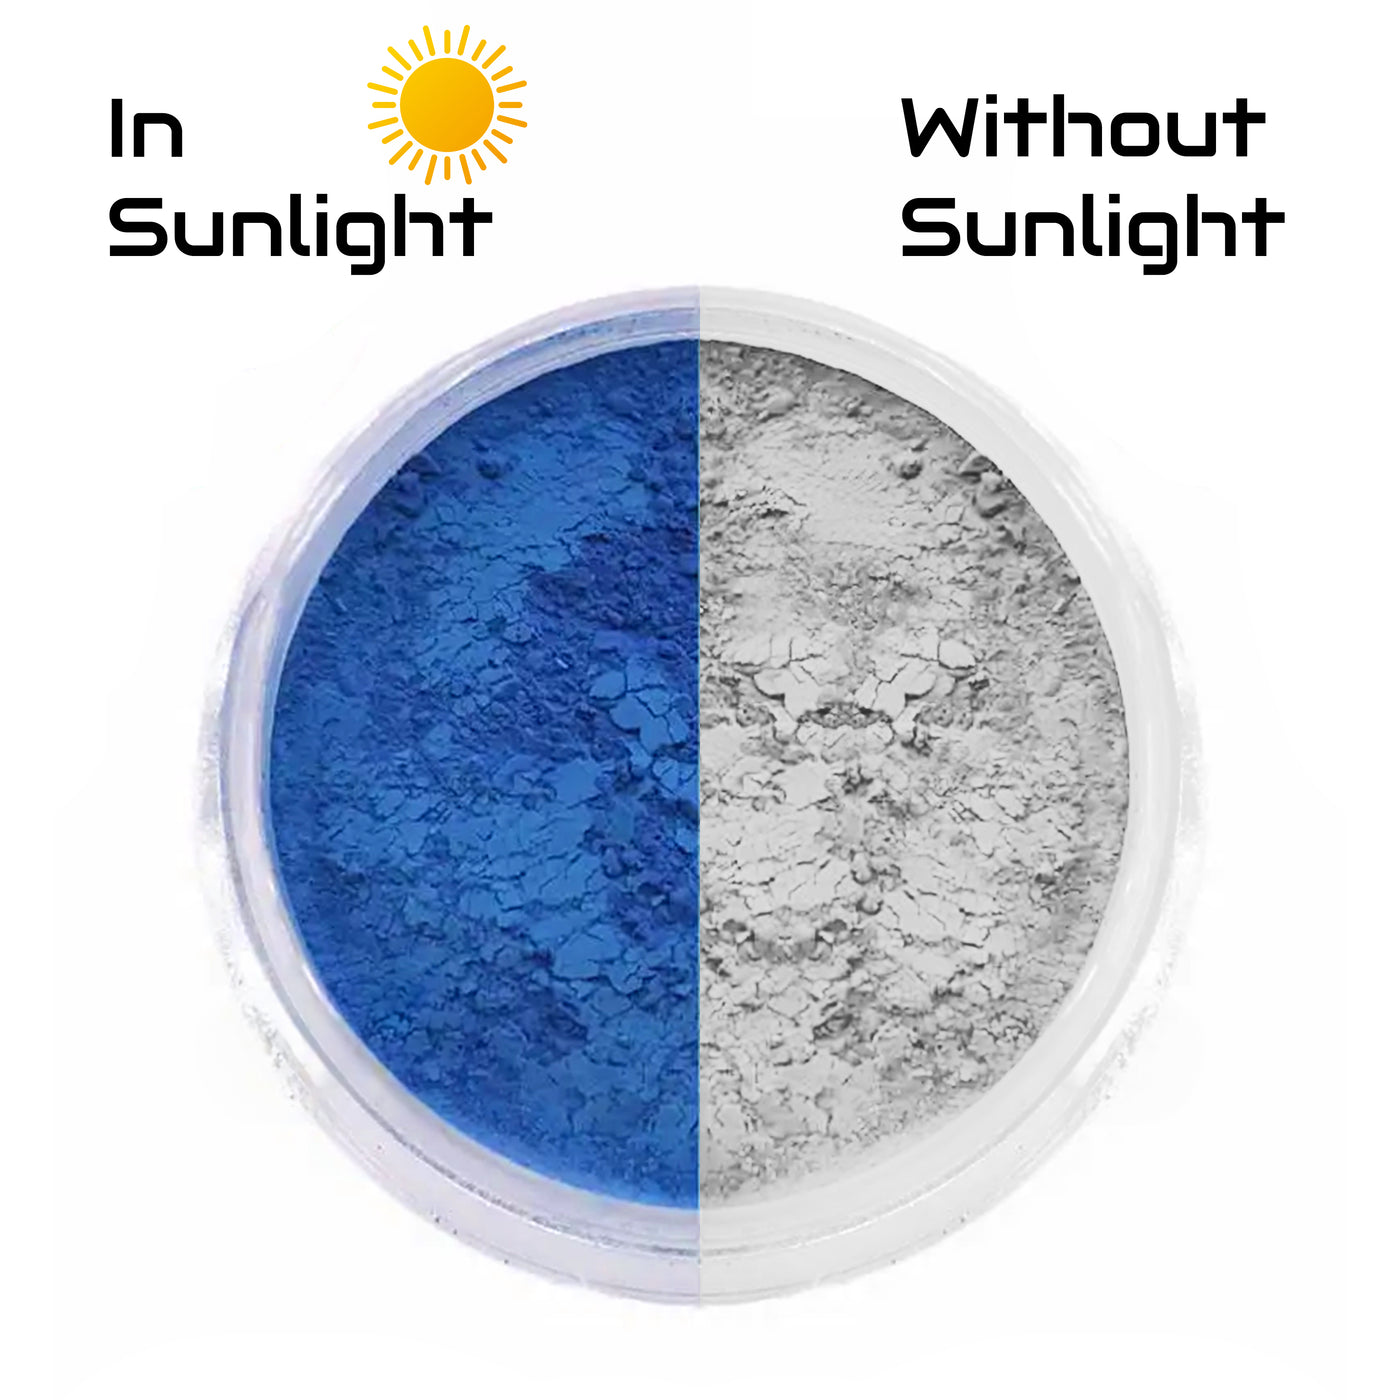 White to Blue - Photochromic Pigment Powder (Changes Color In Sunlight)